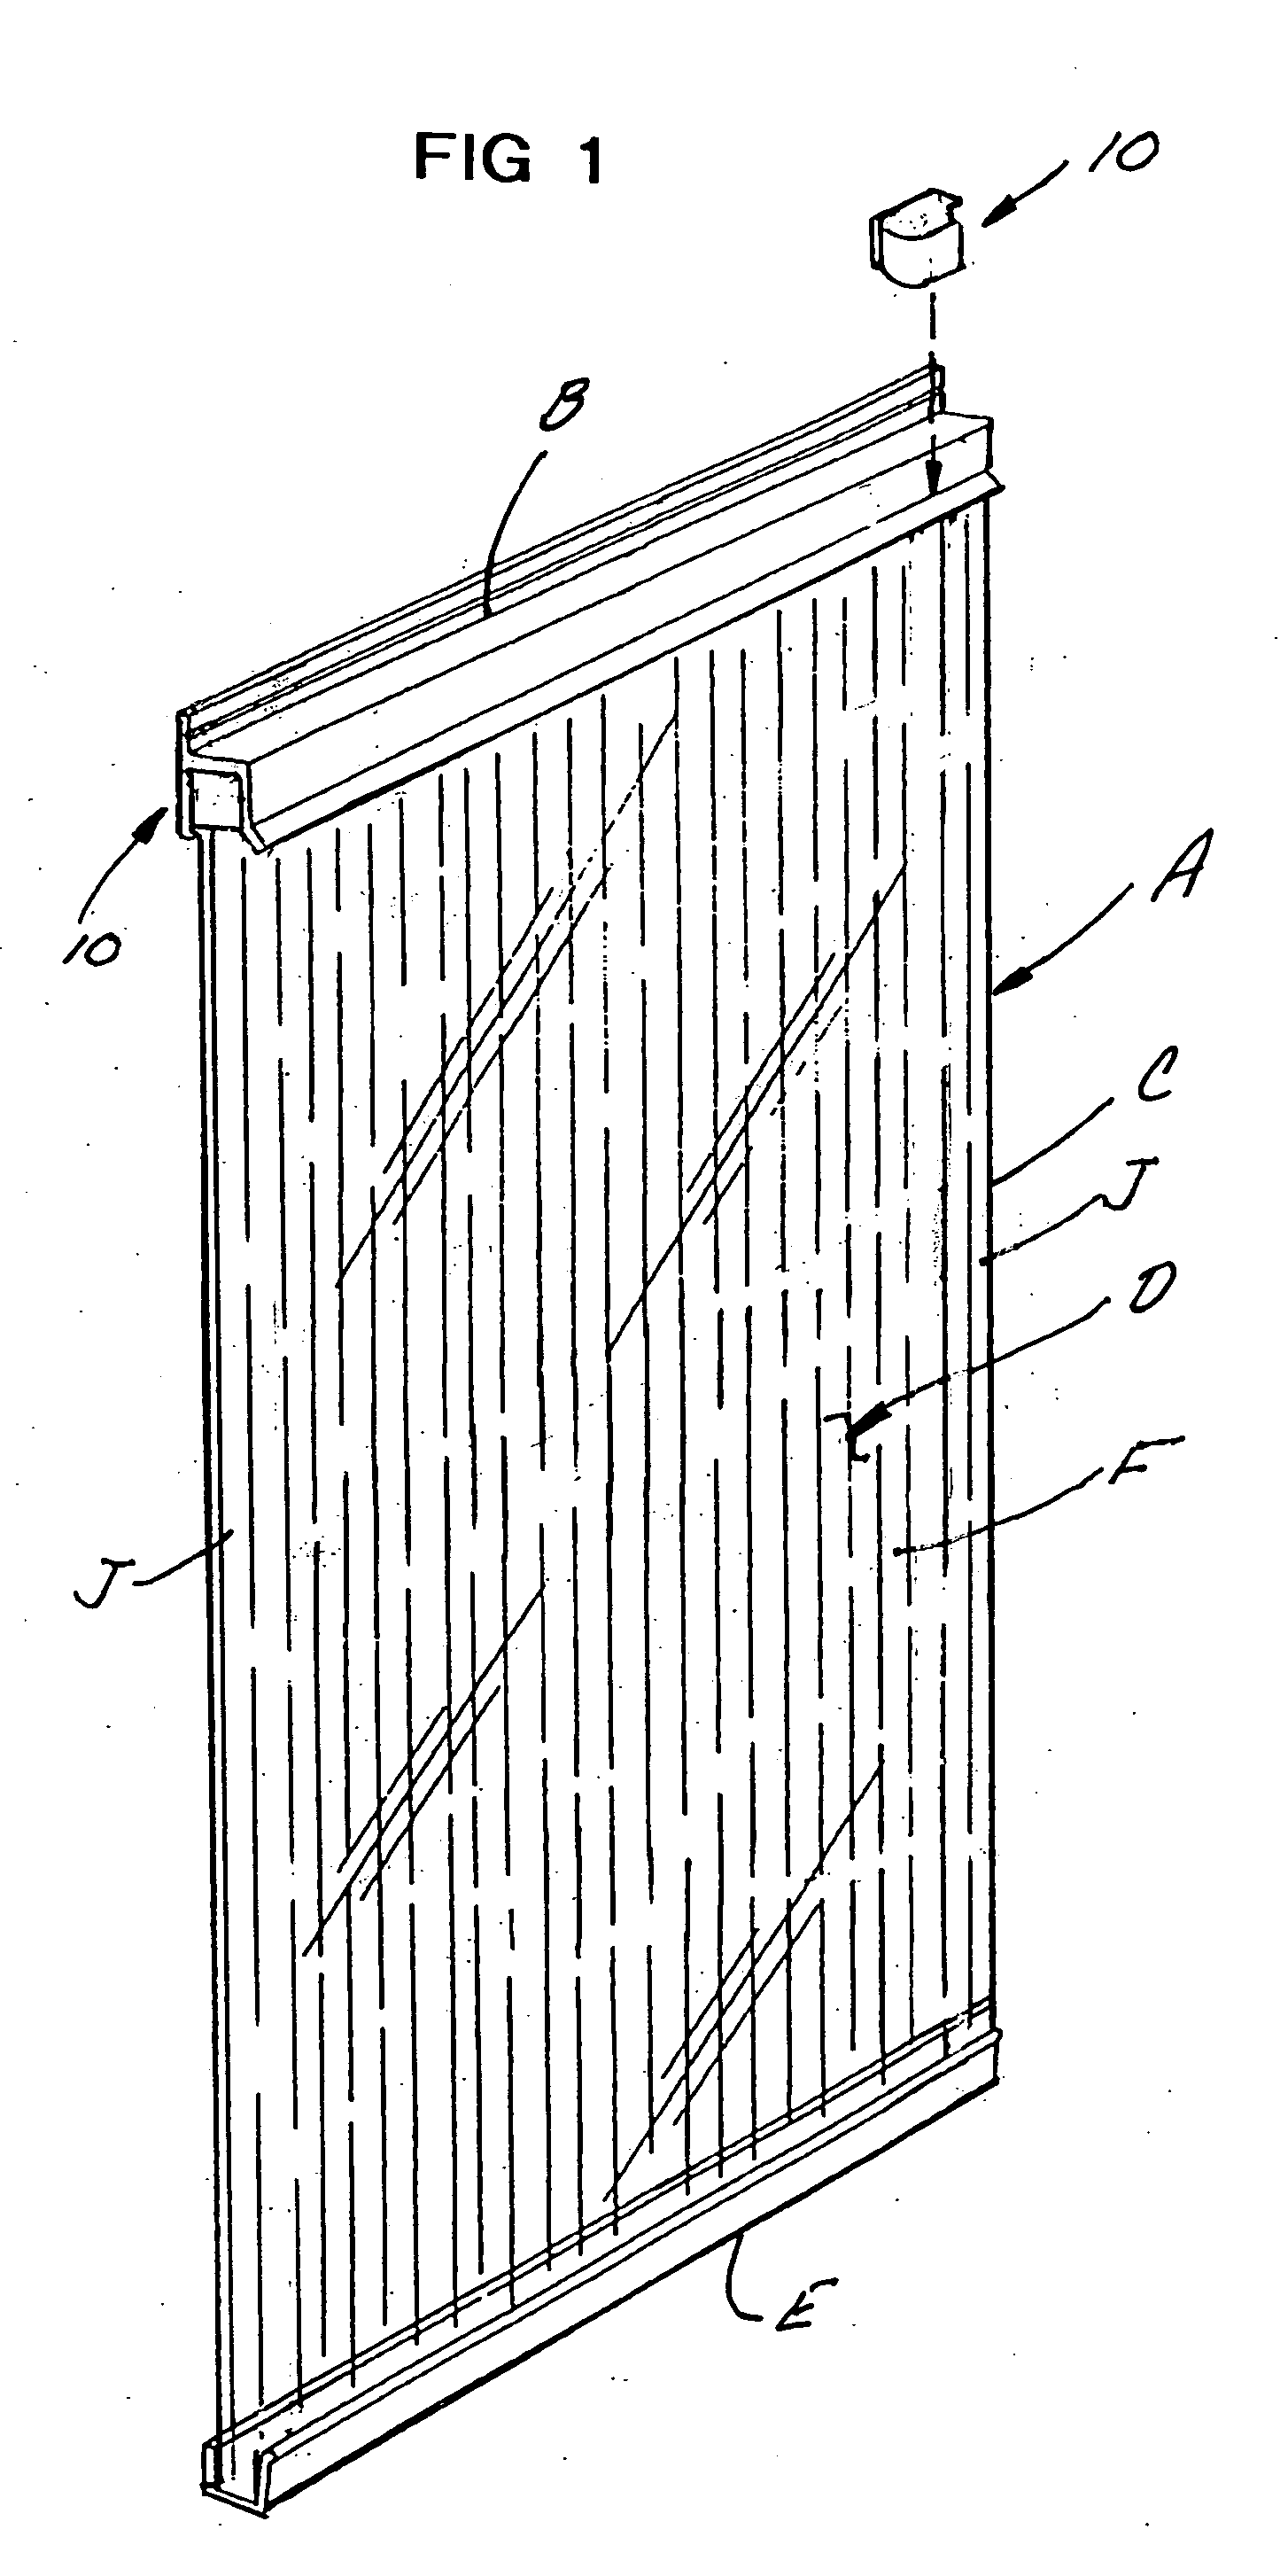 End cap for a corrugated hurricane shutter within an H-header